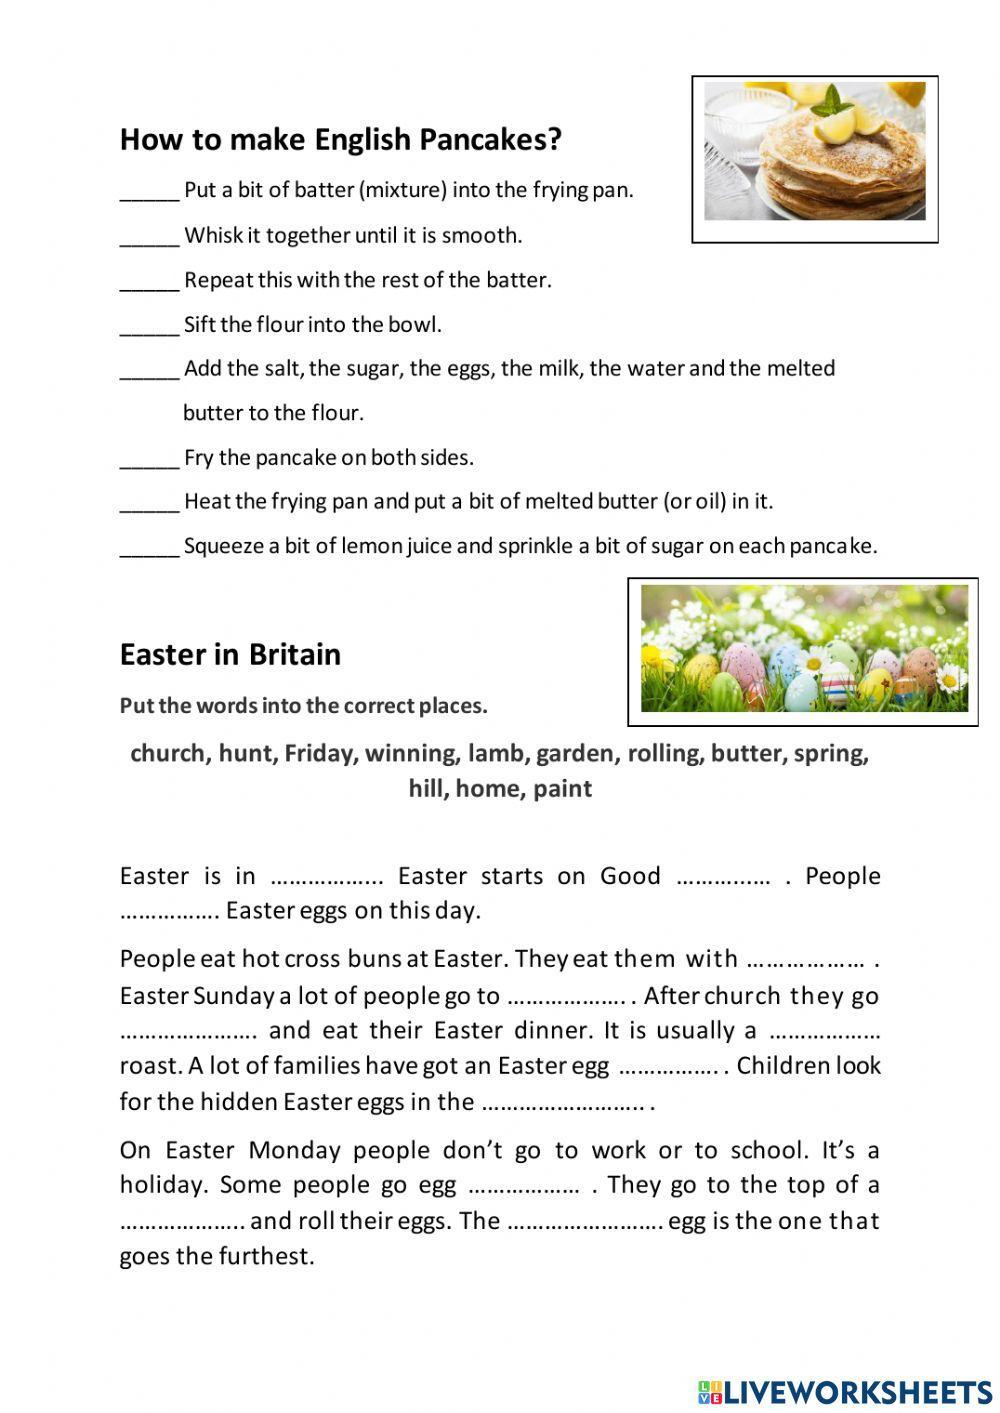 Easter in Britain